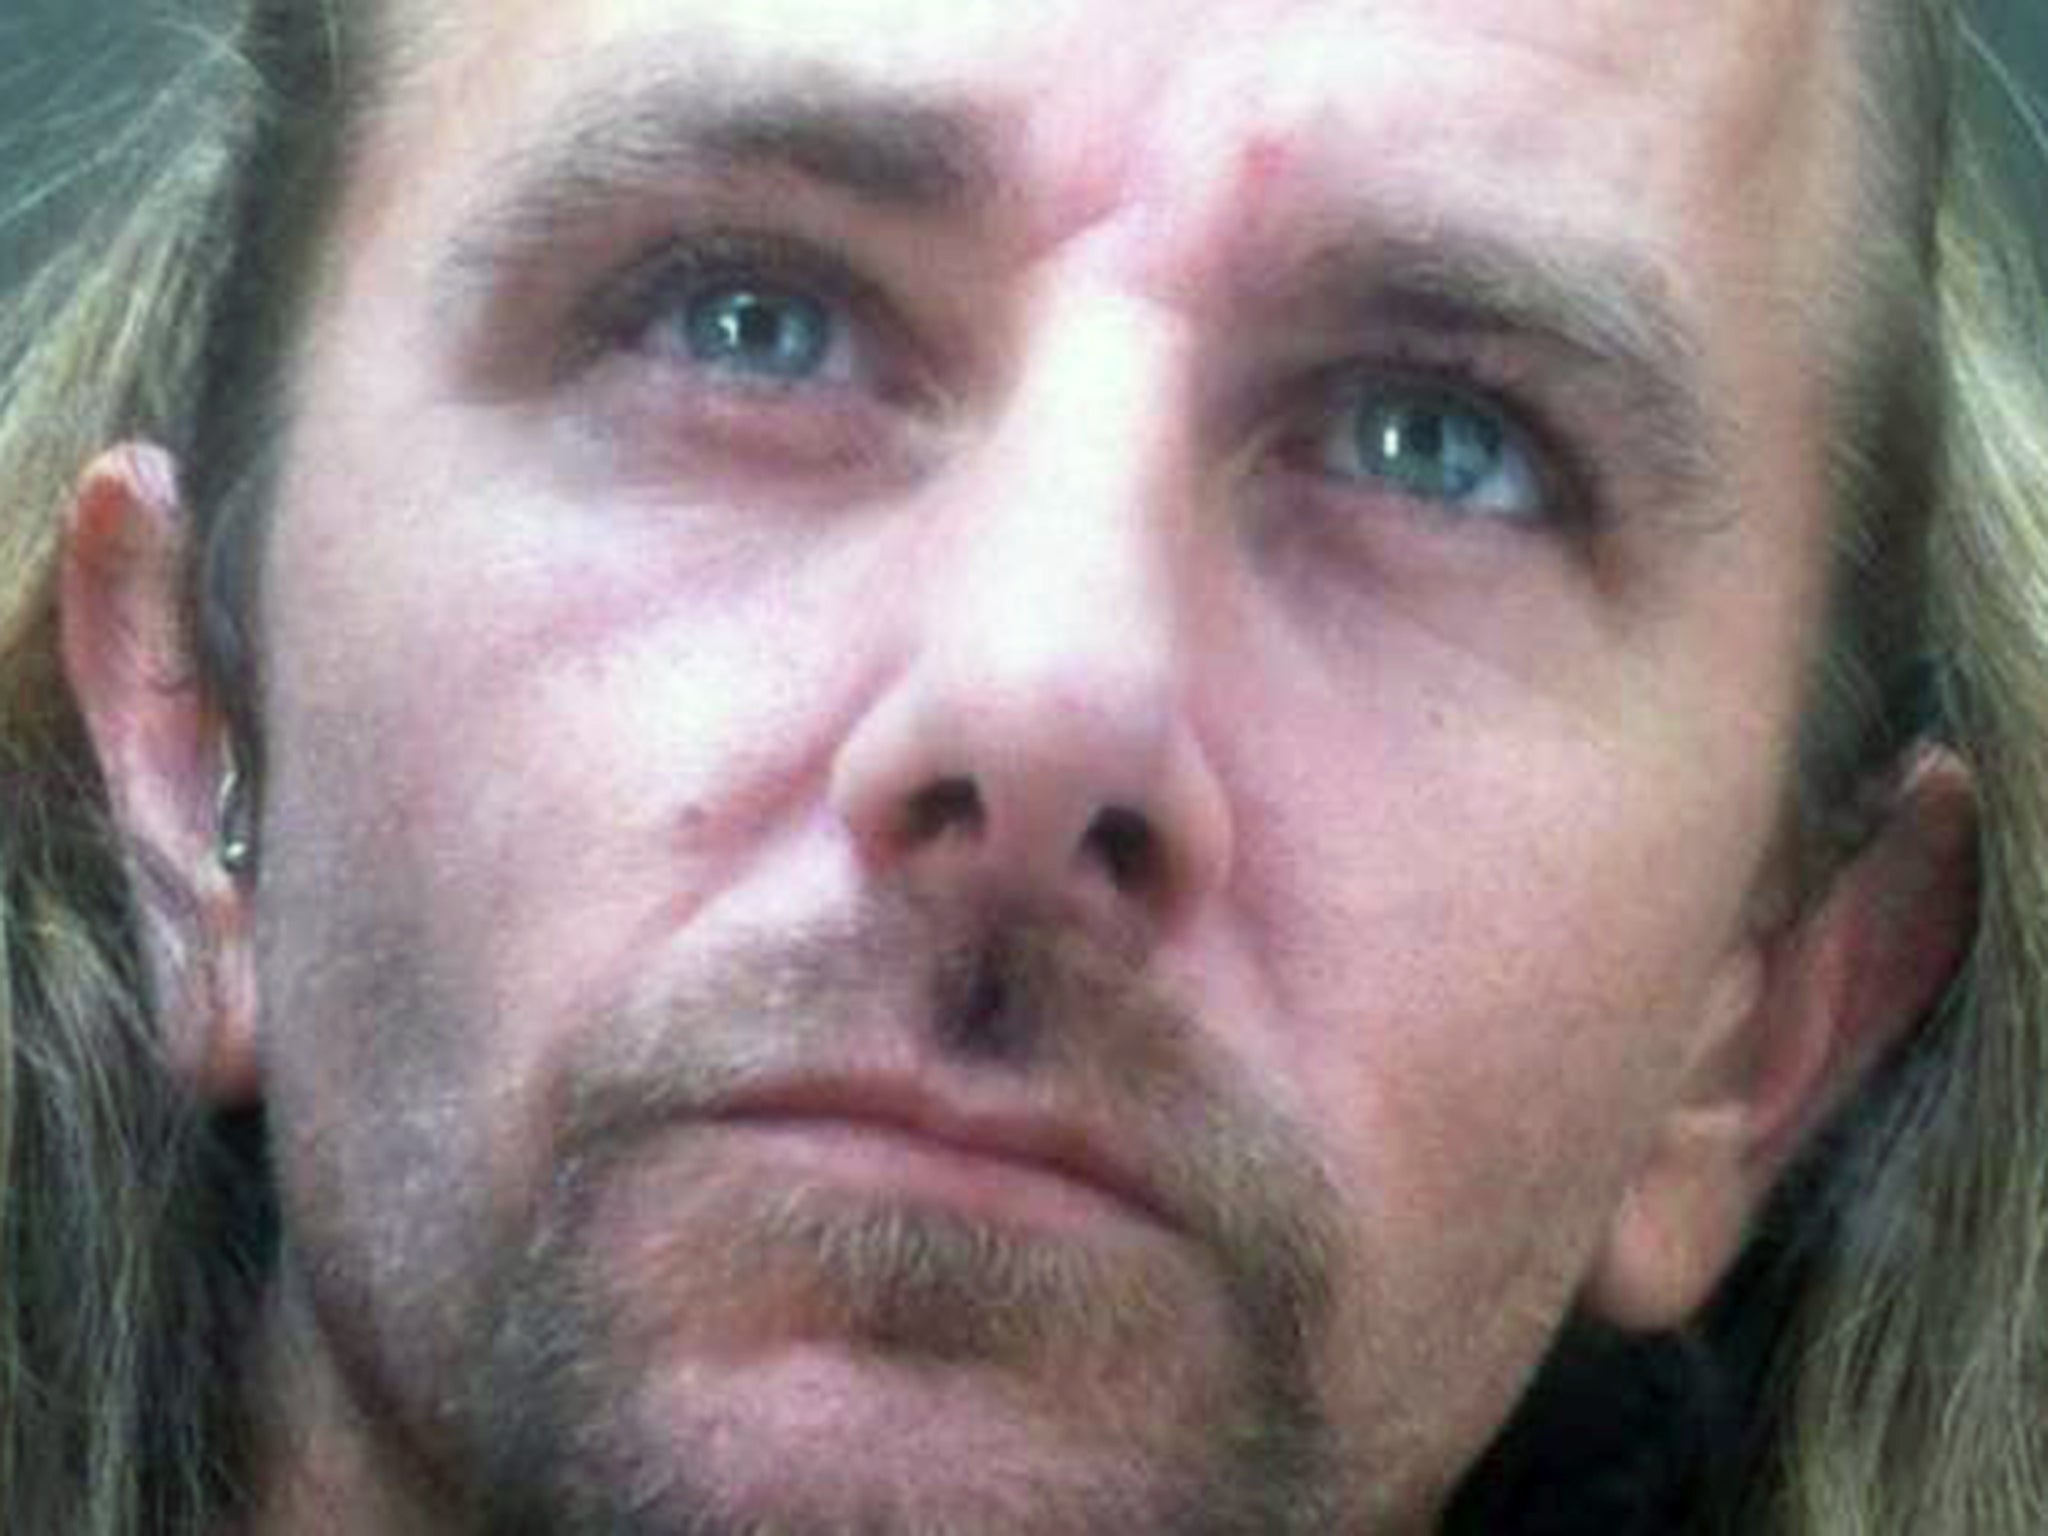 Darren Kelly, 42, was wrongly thought to be a paedophile